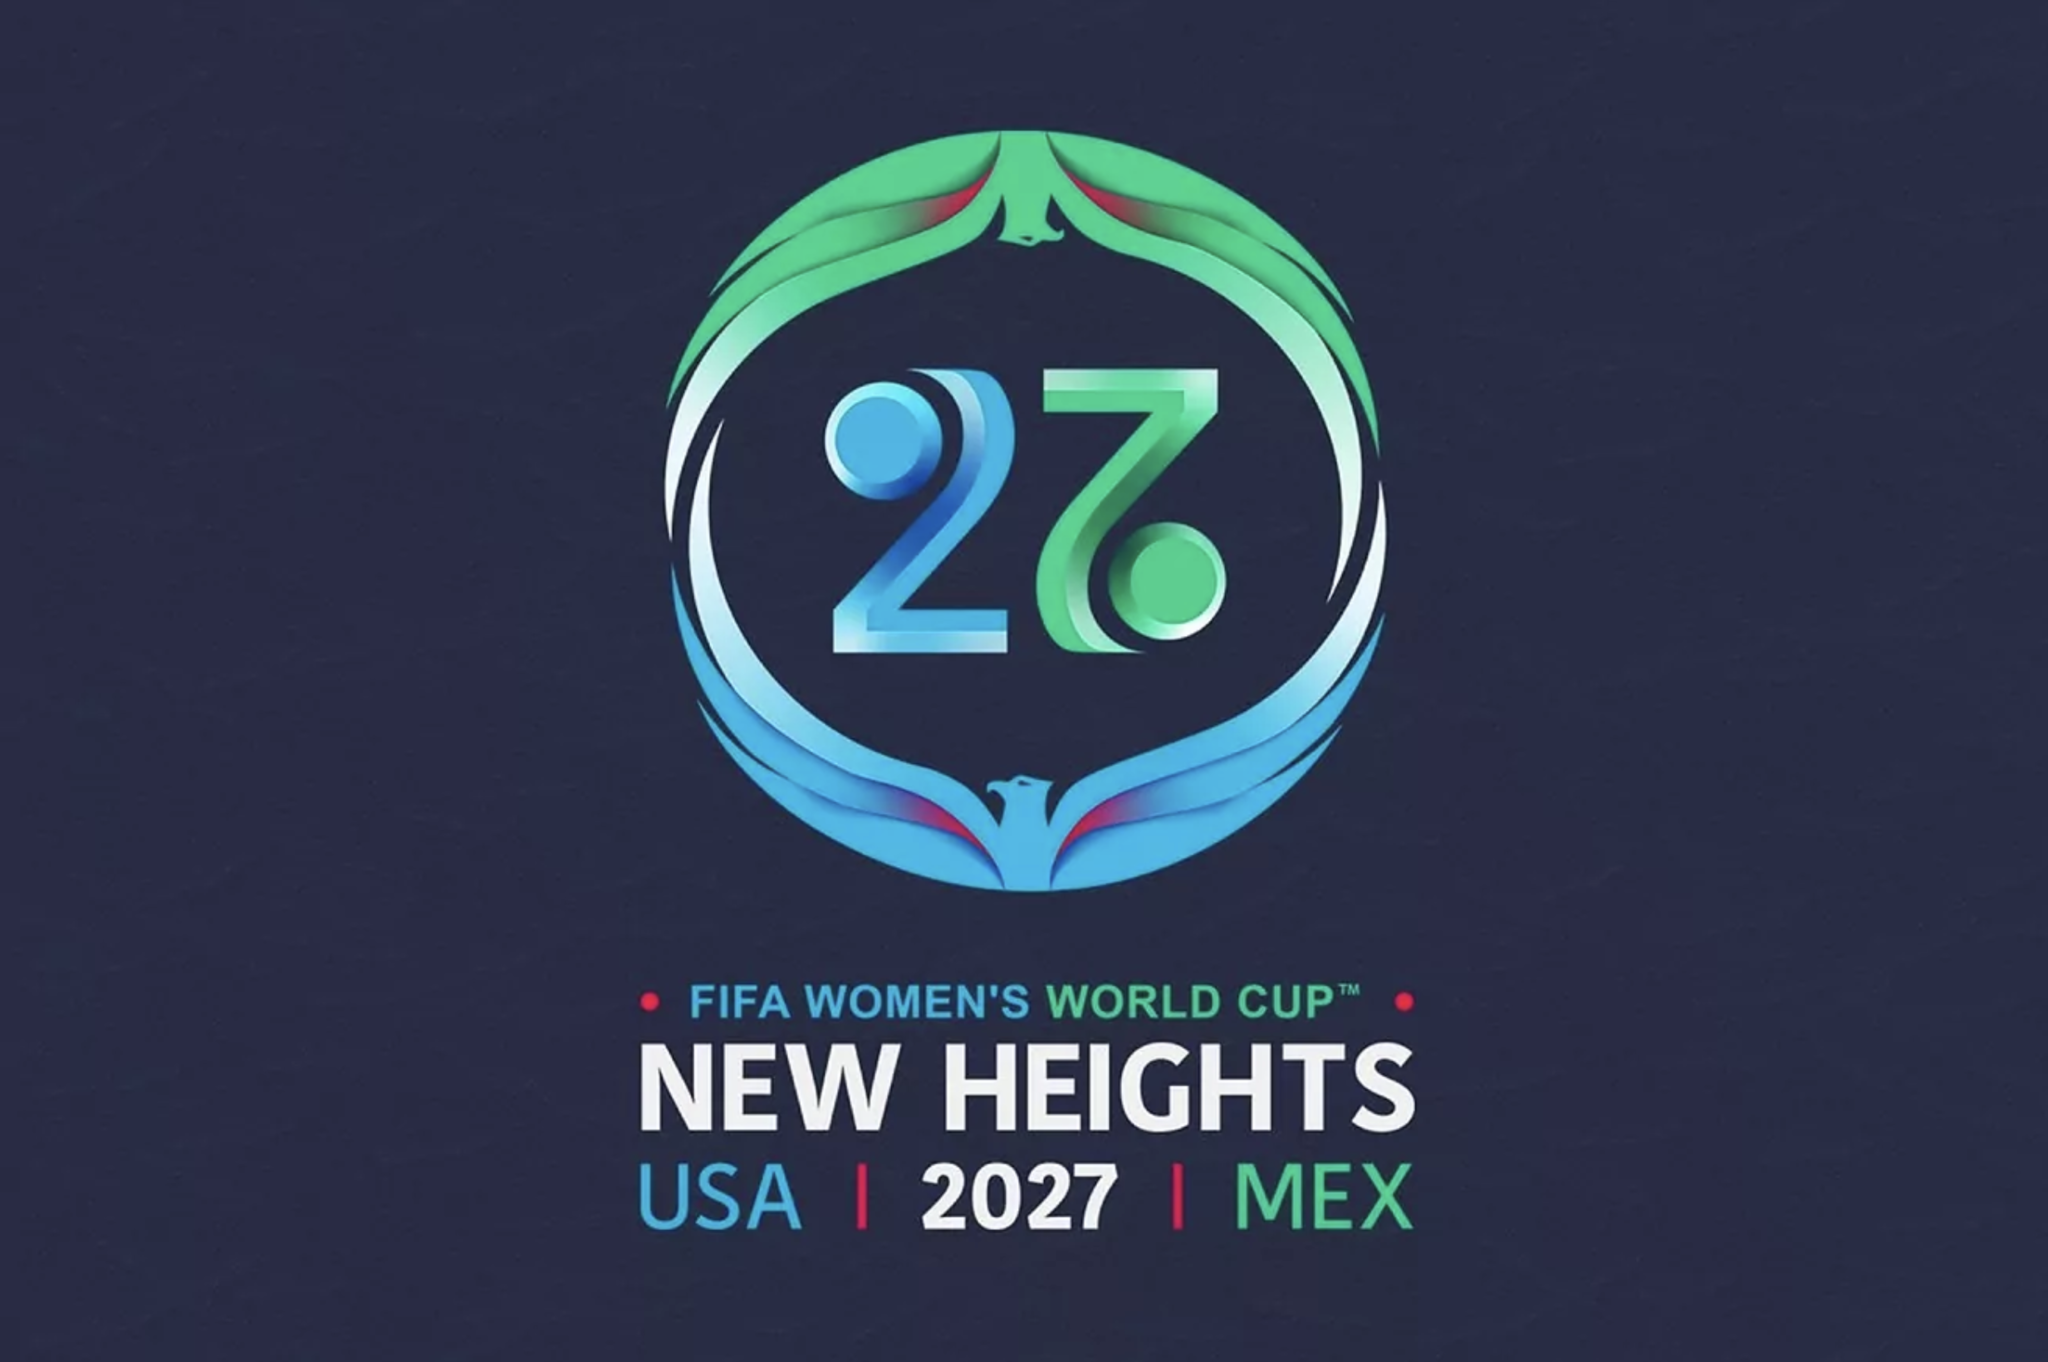 United States and Mexico for another World Cup: Bidding for 2027 Womens World Cup